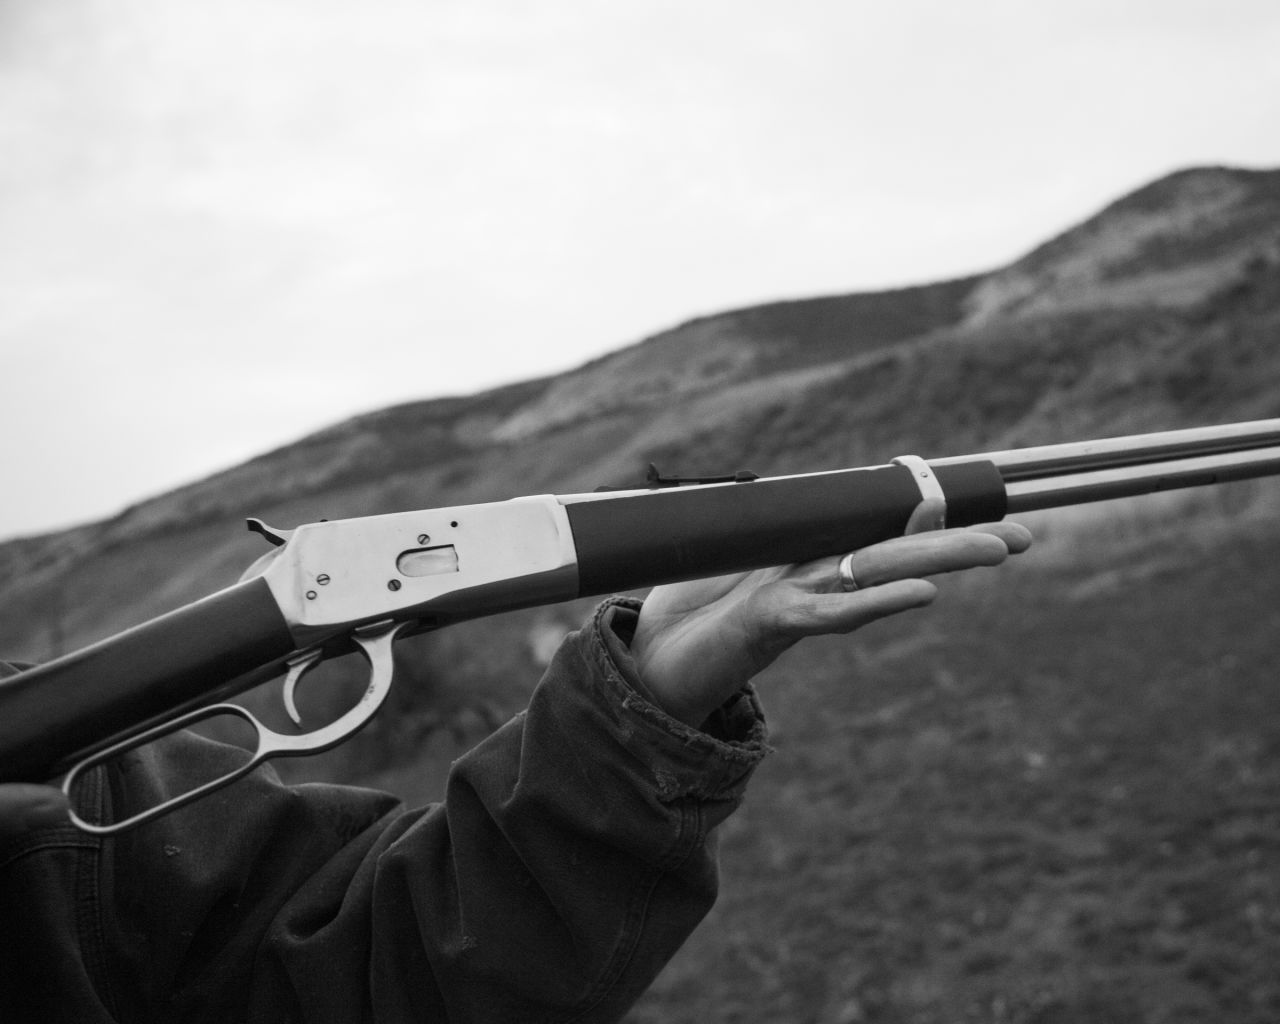 Photographed while out coyote hunting, local resident Jarad shows Horvath his gun.